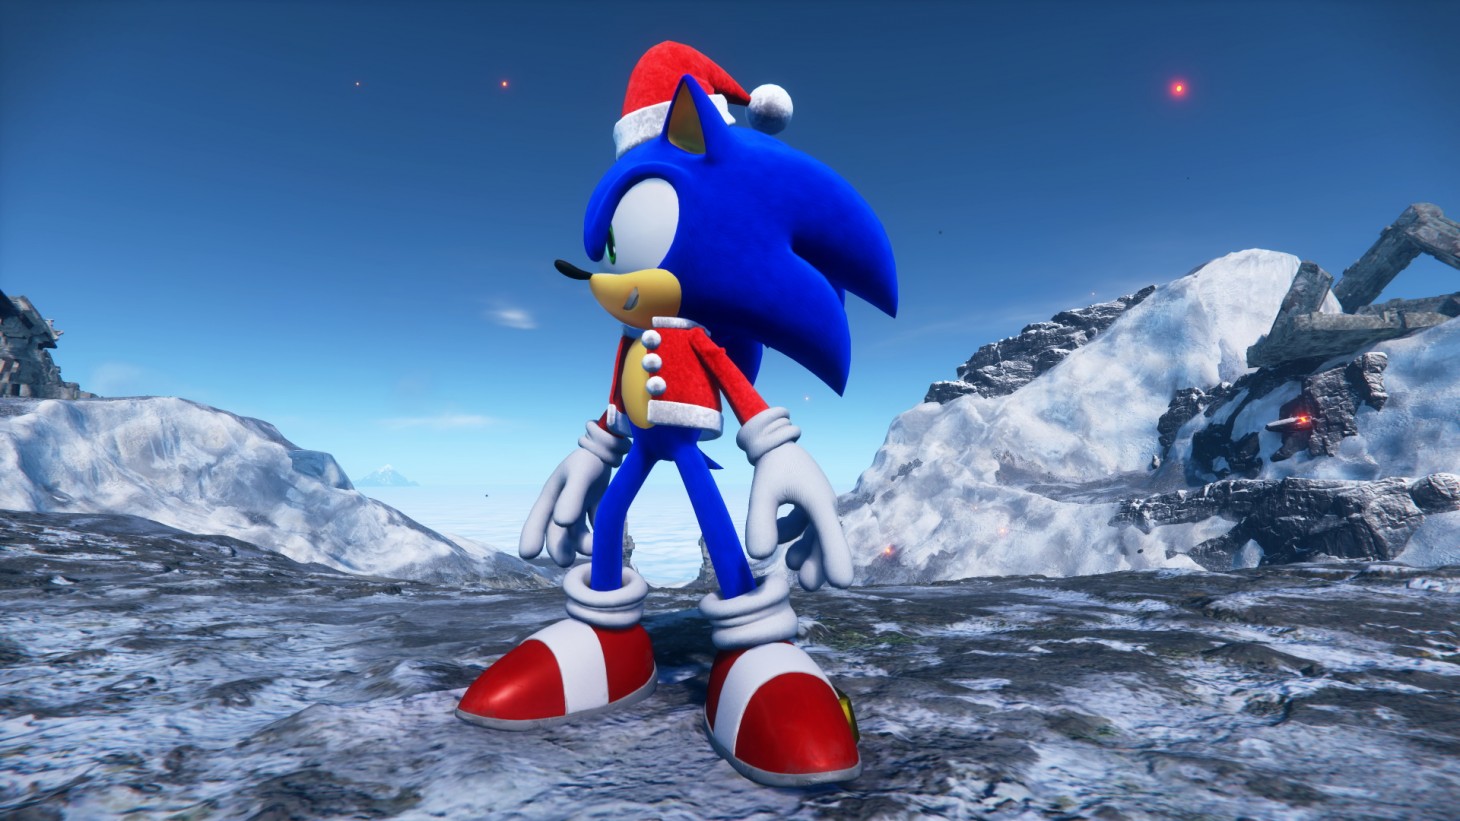 Sonic Frontiers Update 3, What Time Will Sonic Frontiers Update 3 Come Out?  - News